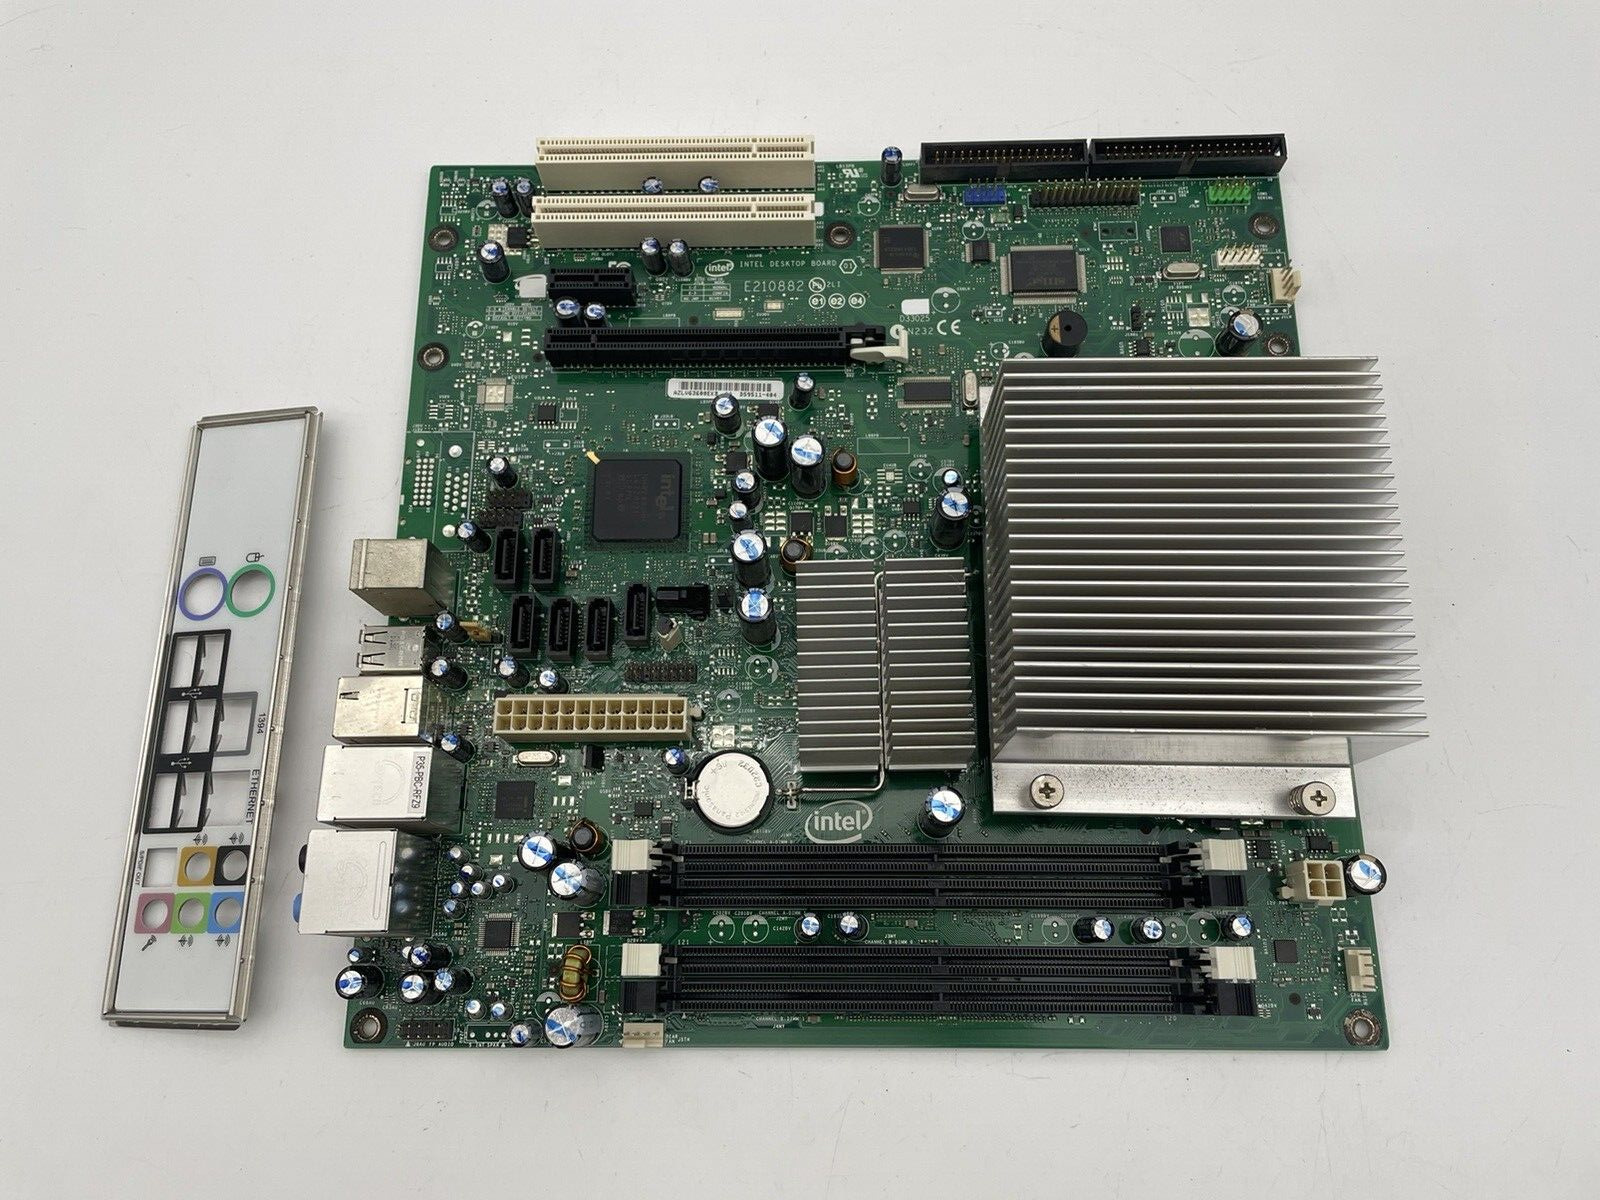 INTEL DP965LVG2 D59511-404 Motherboard with CPU, I/O Shield and Heat Sink